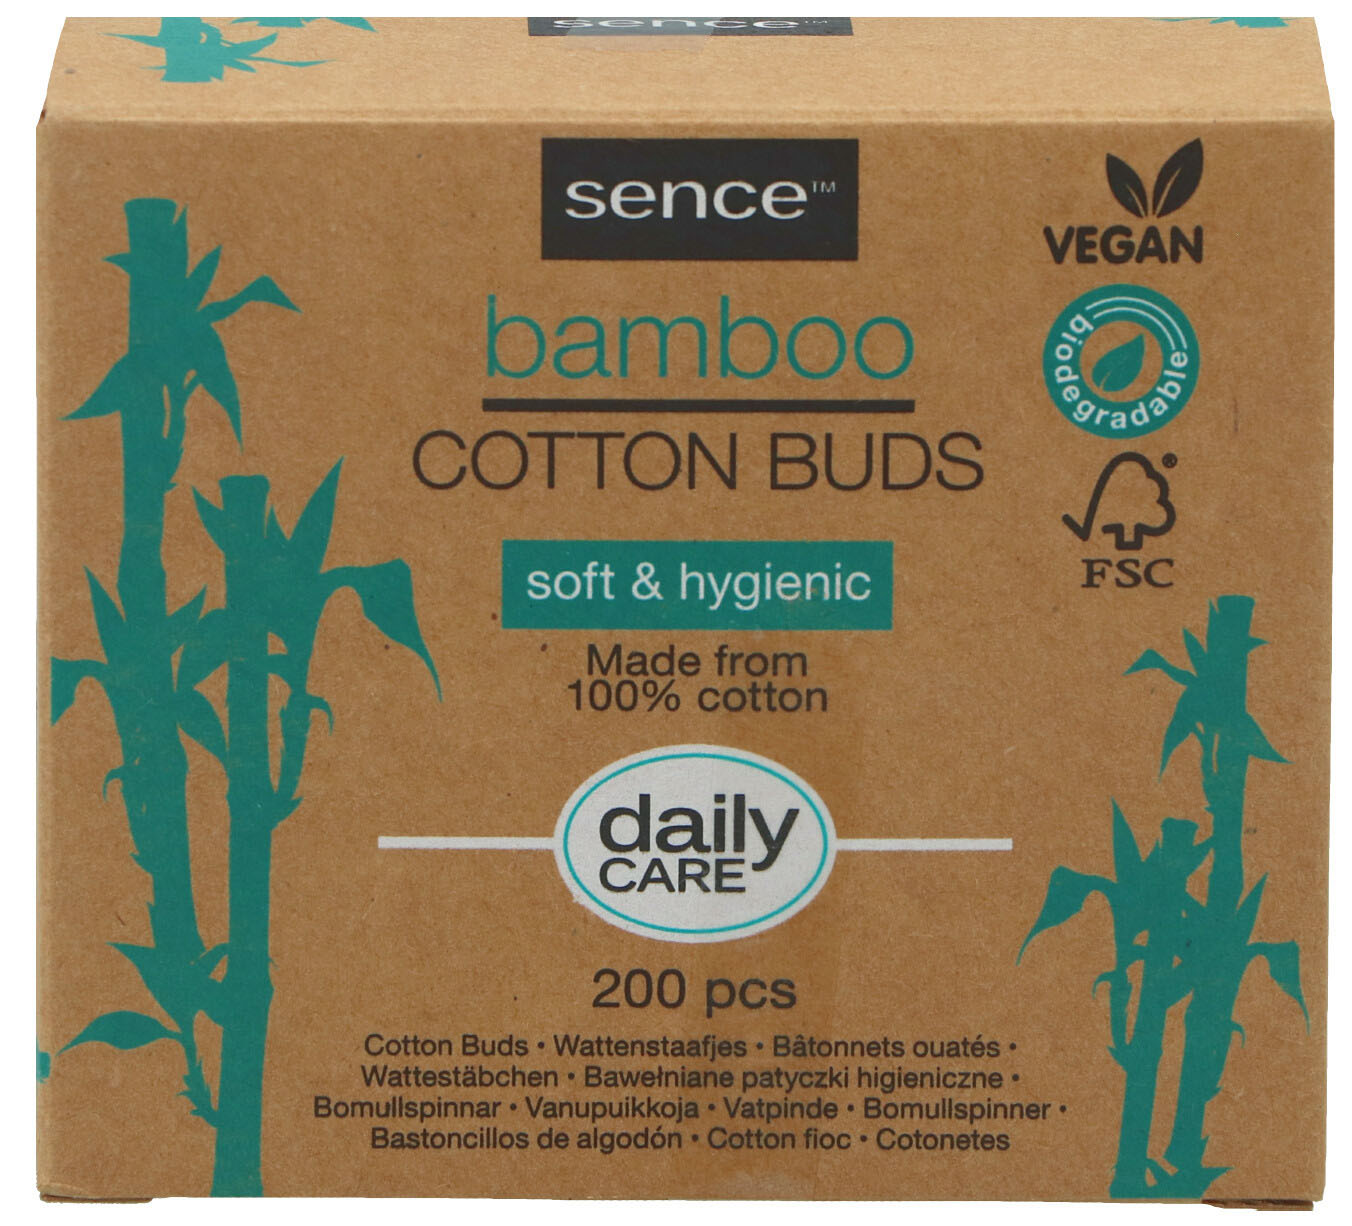 00637 - cotton buds pack of 200